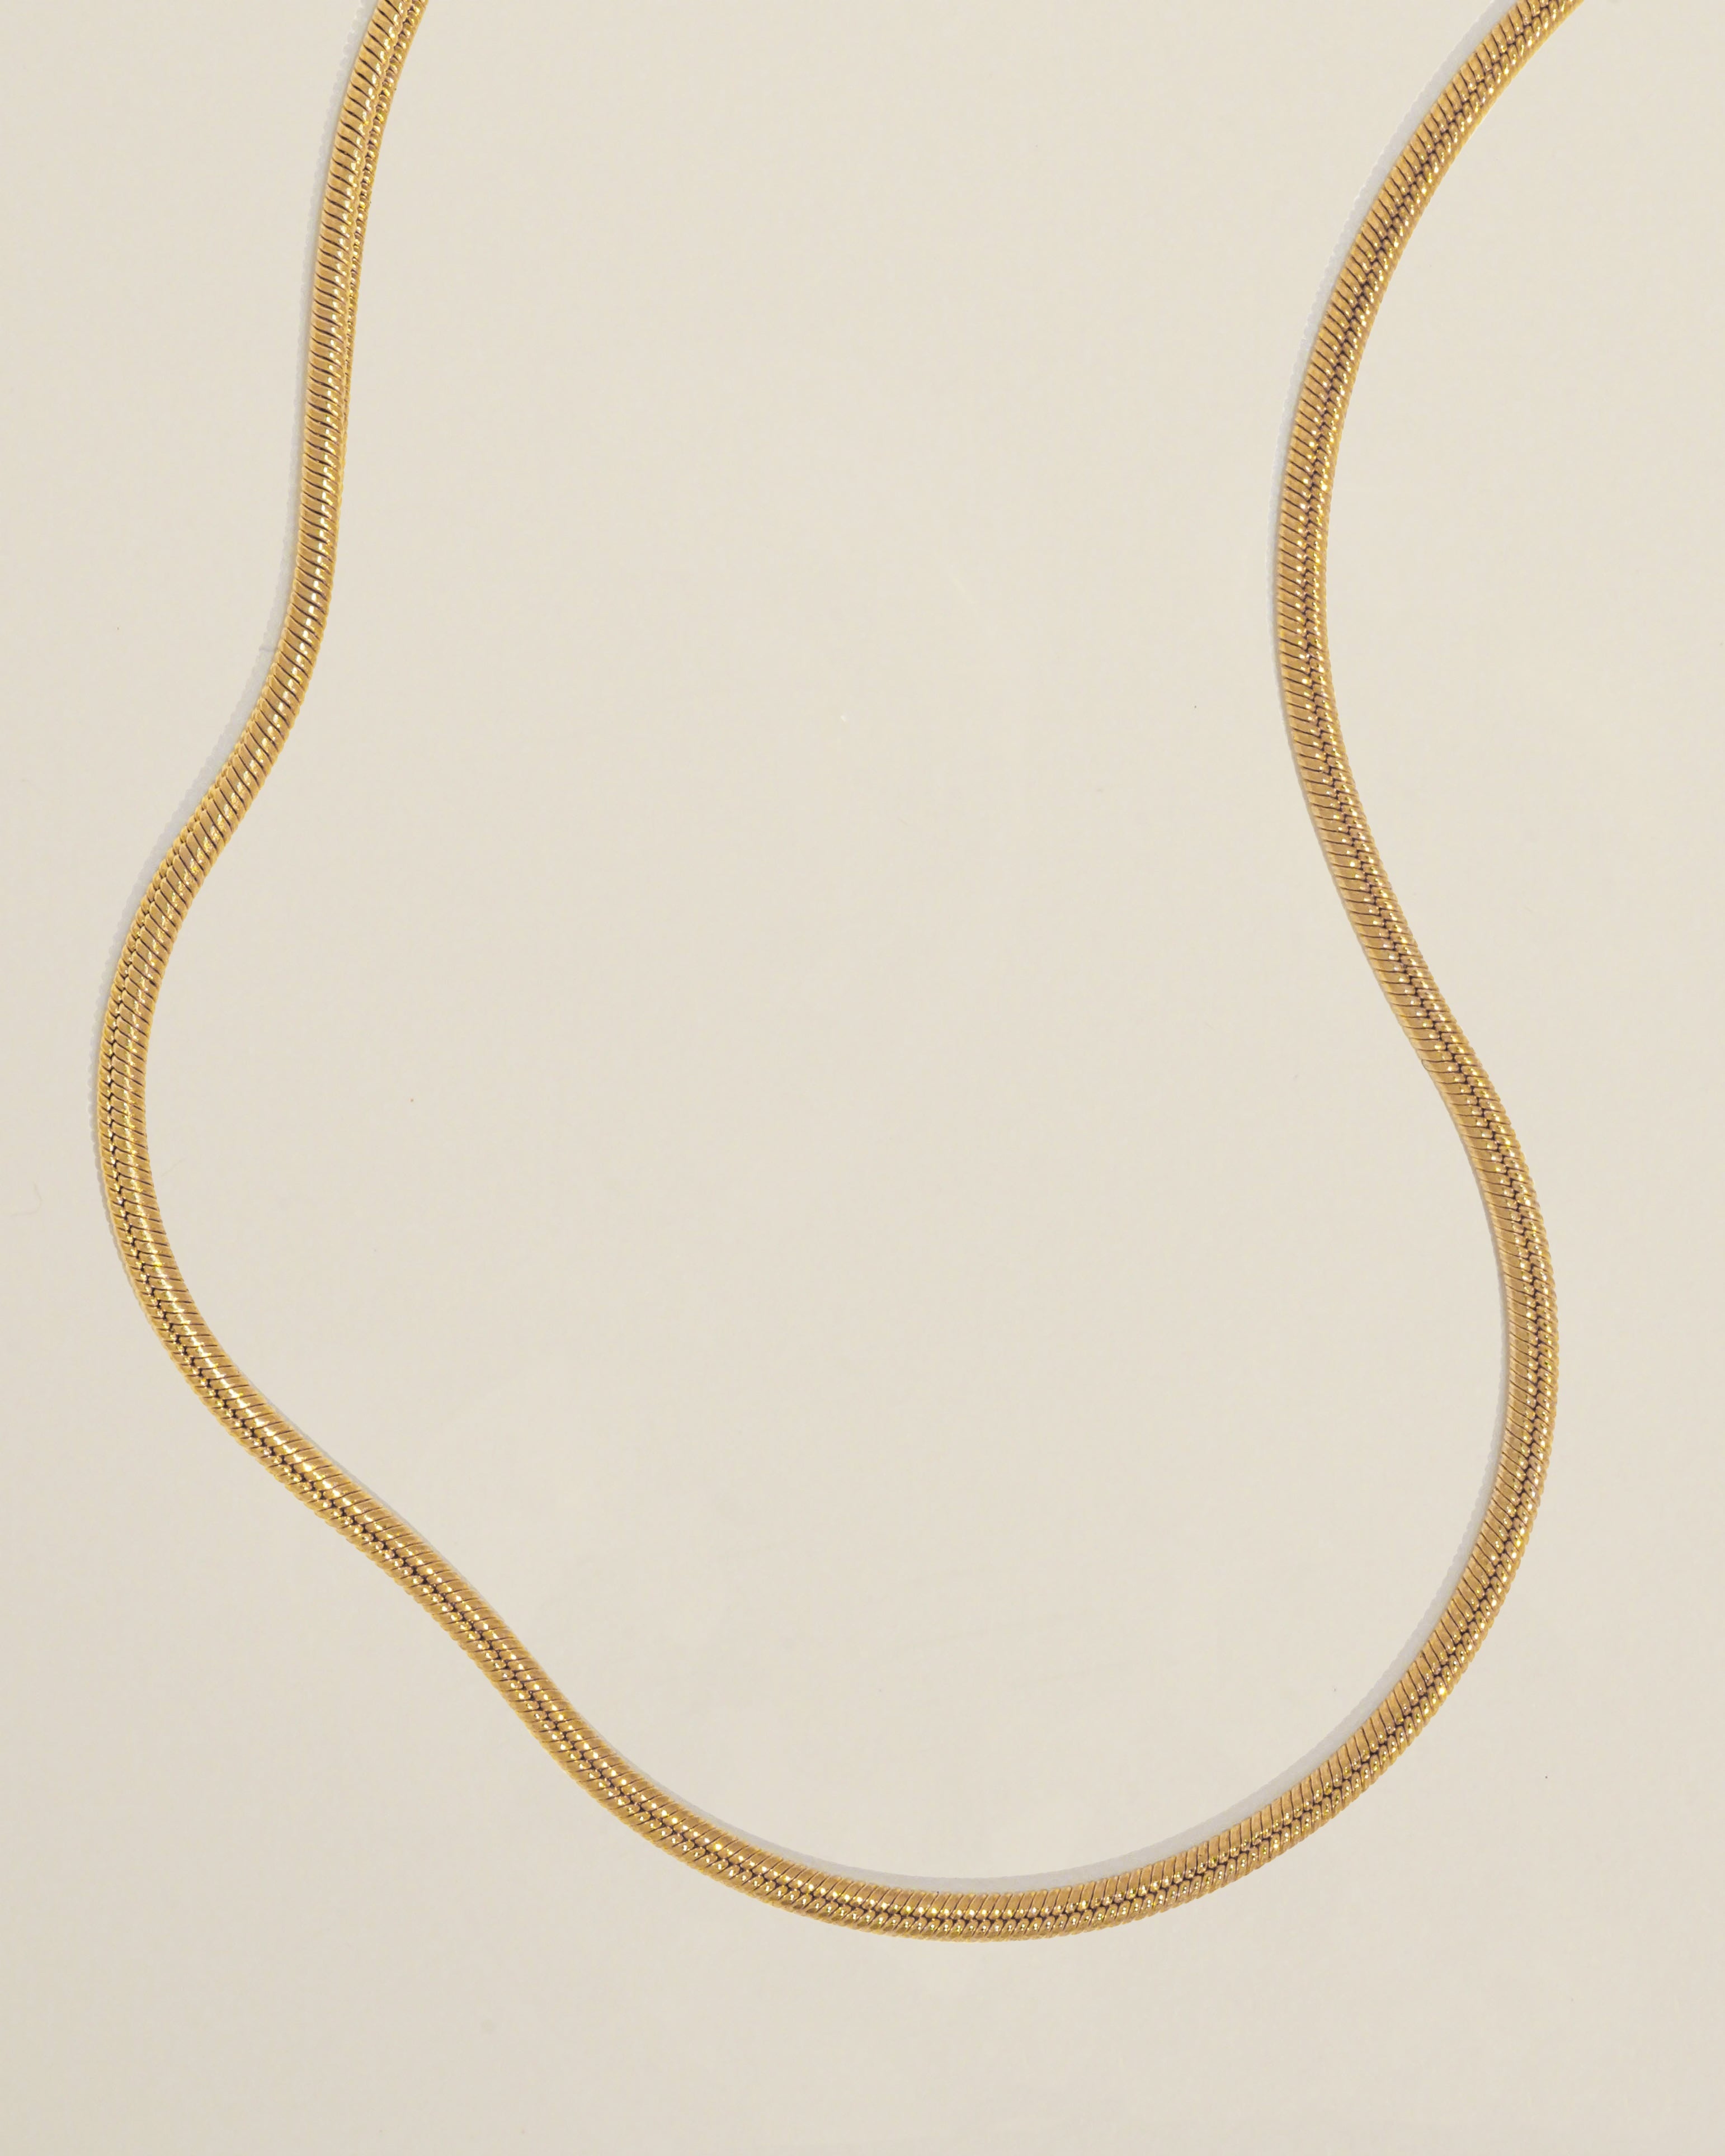 Hove Necklace